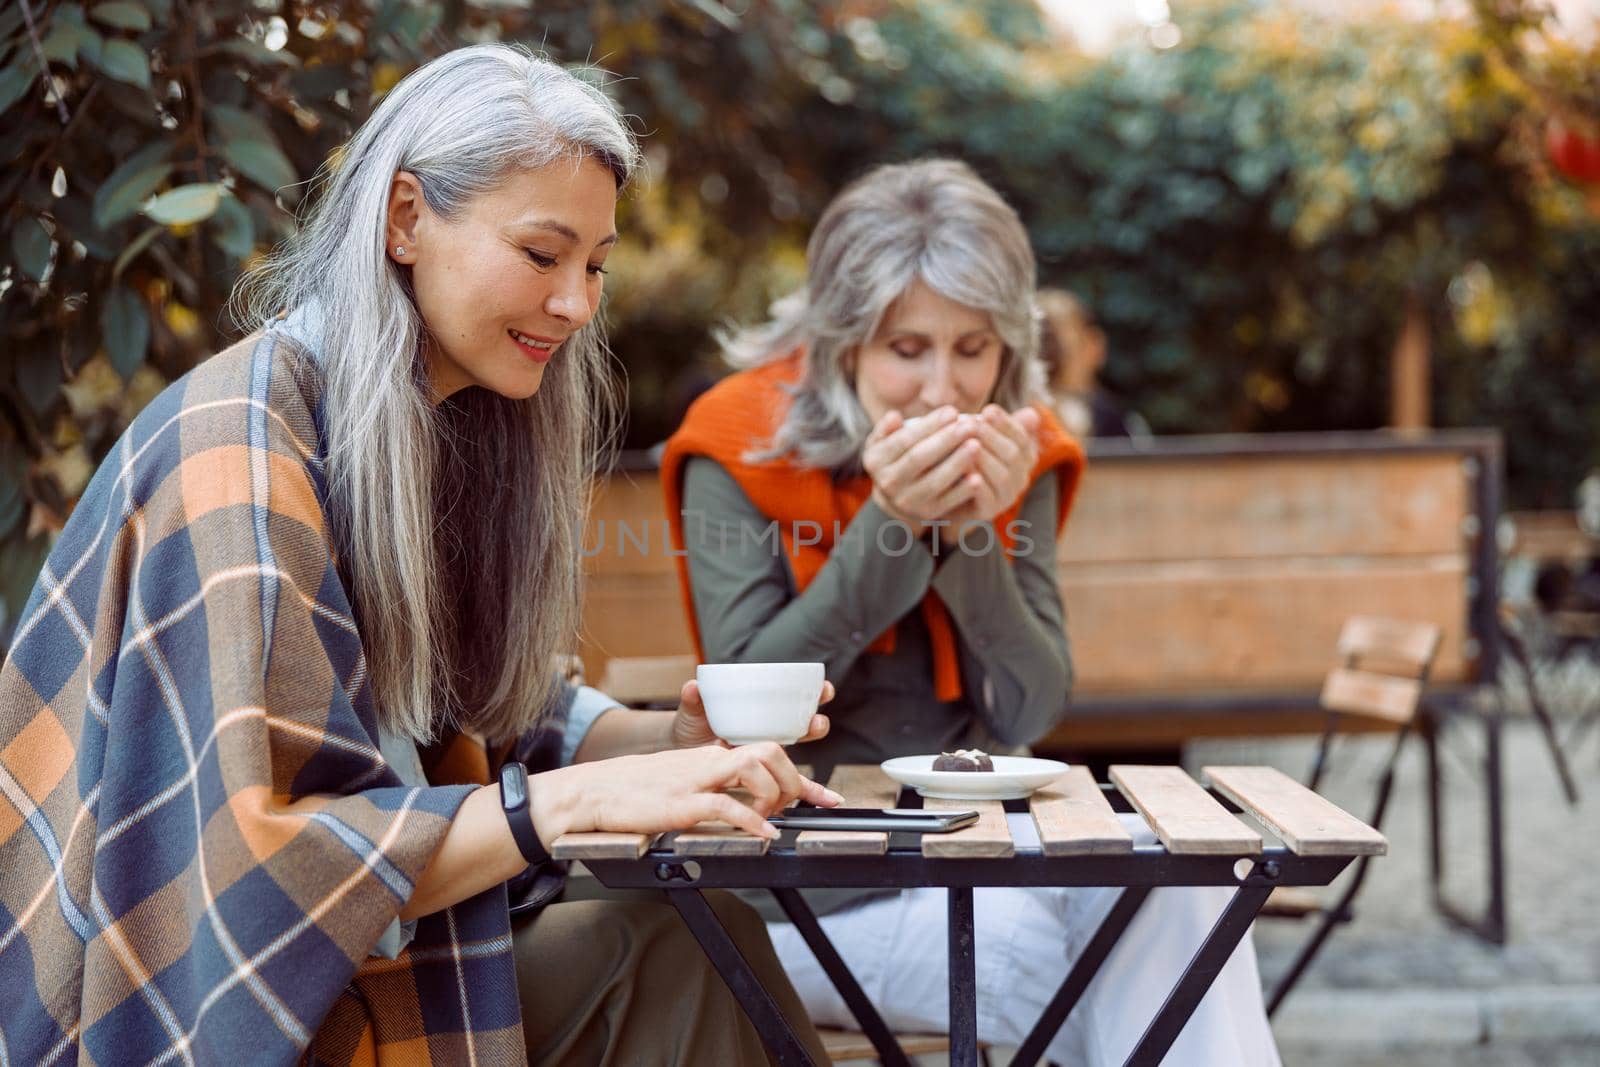 Senior Asian woman uses mobile phone while hoary haired friend drinks tea sitting at small wooden table in street cafe on nice autumn day